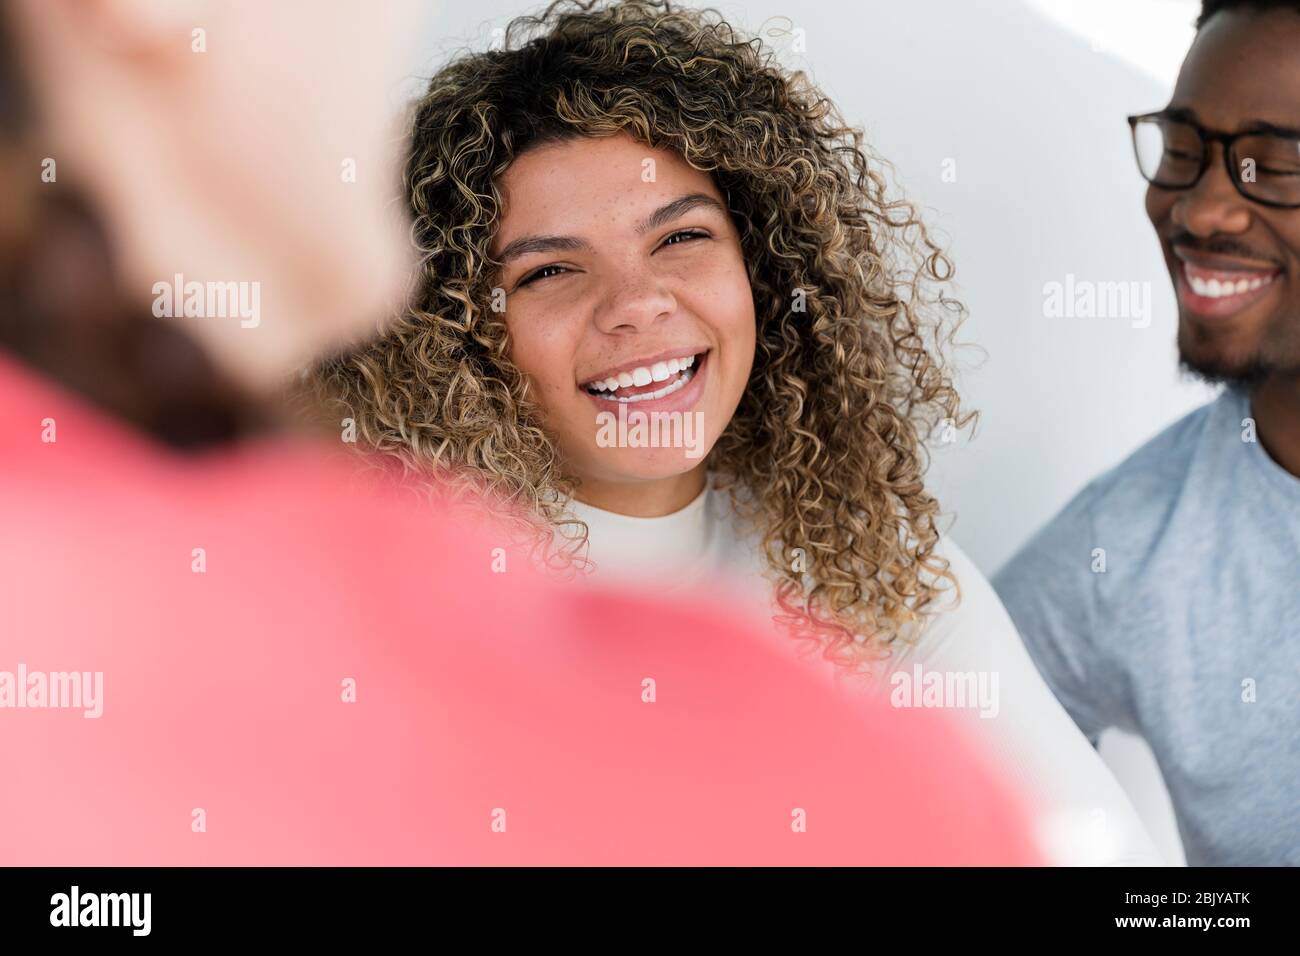 Portrait of woman hanging out with friendsÂ Stock Photo